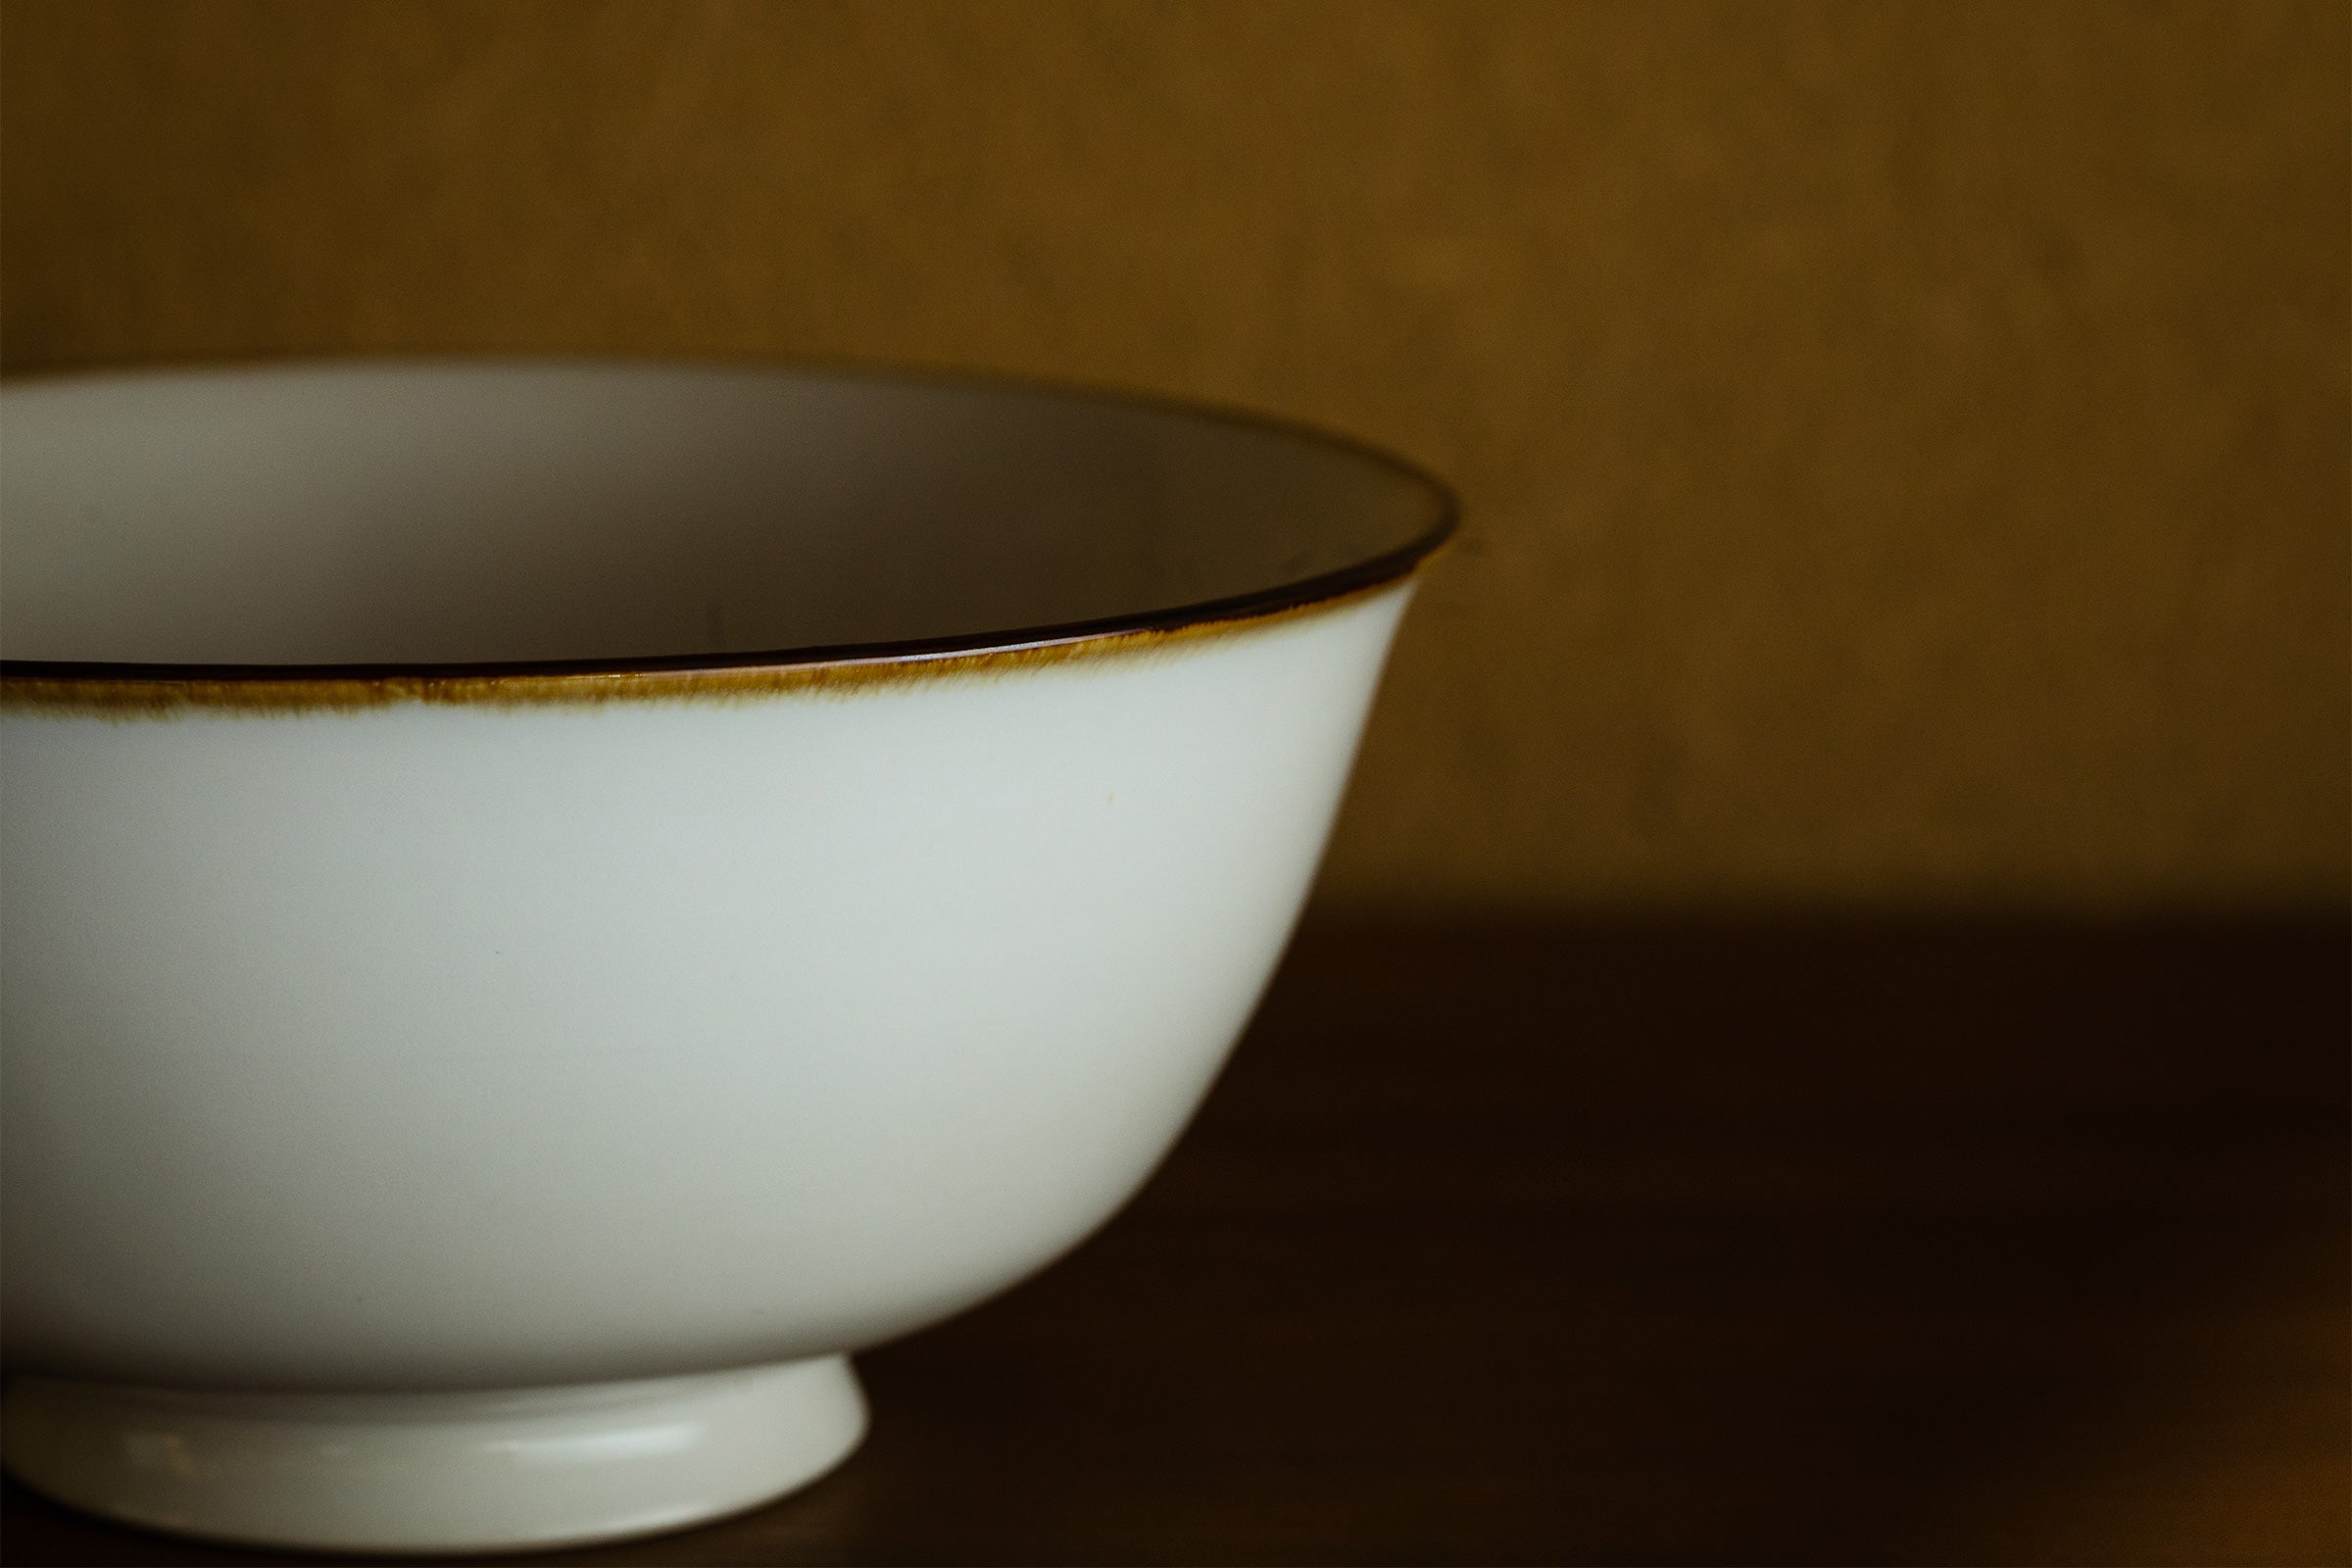 jicon-porcelain-bowl-factory-close-up-shot-by-sojao